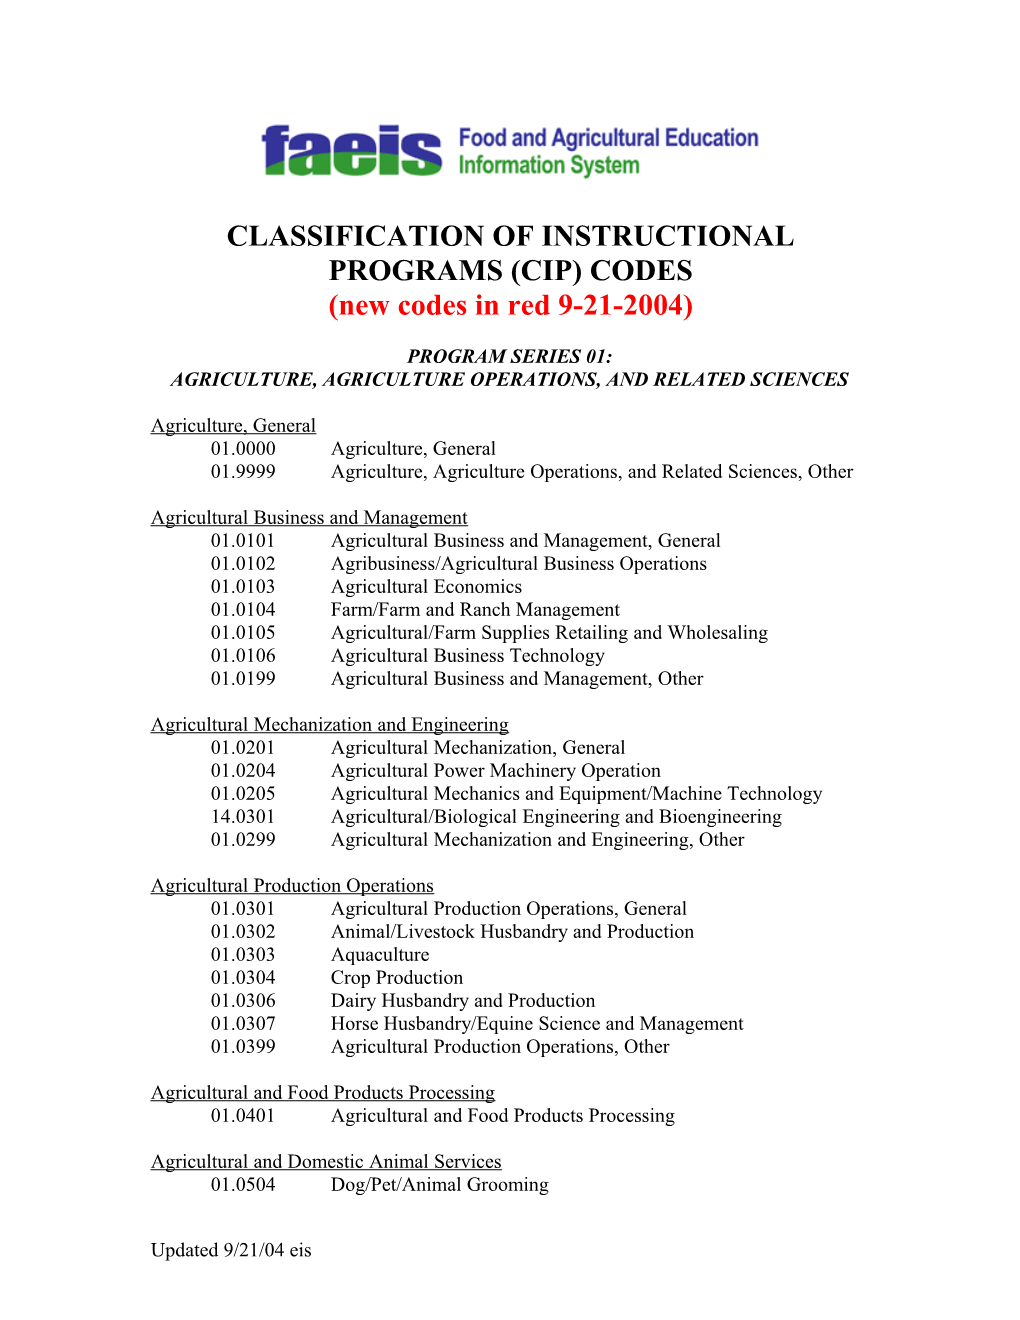 Classification of Instructional Programs (Cip) Codes